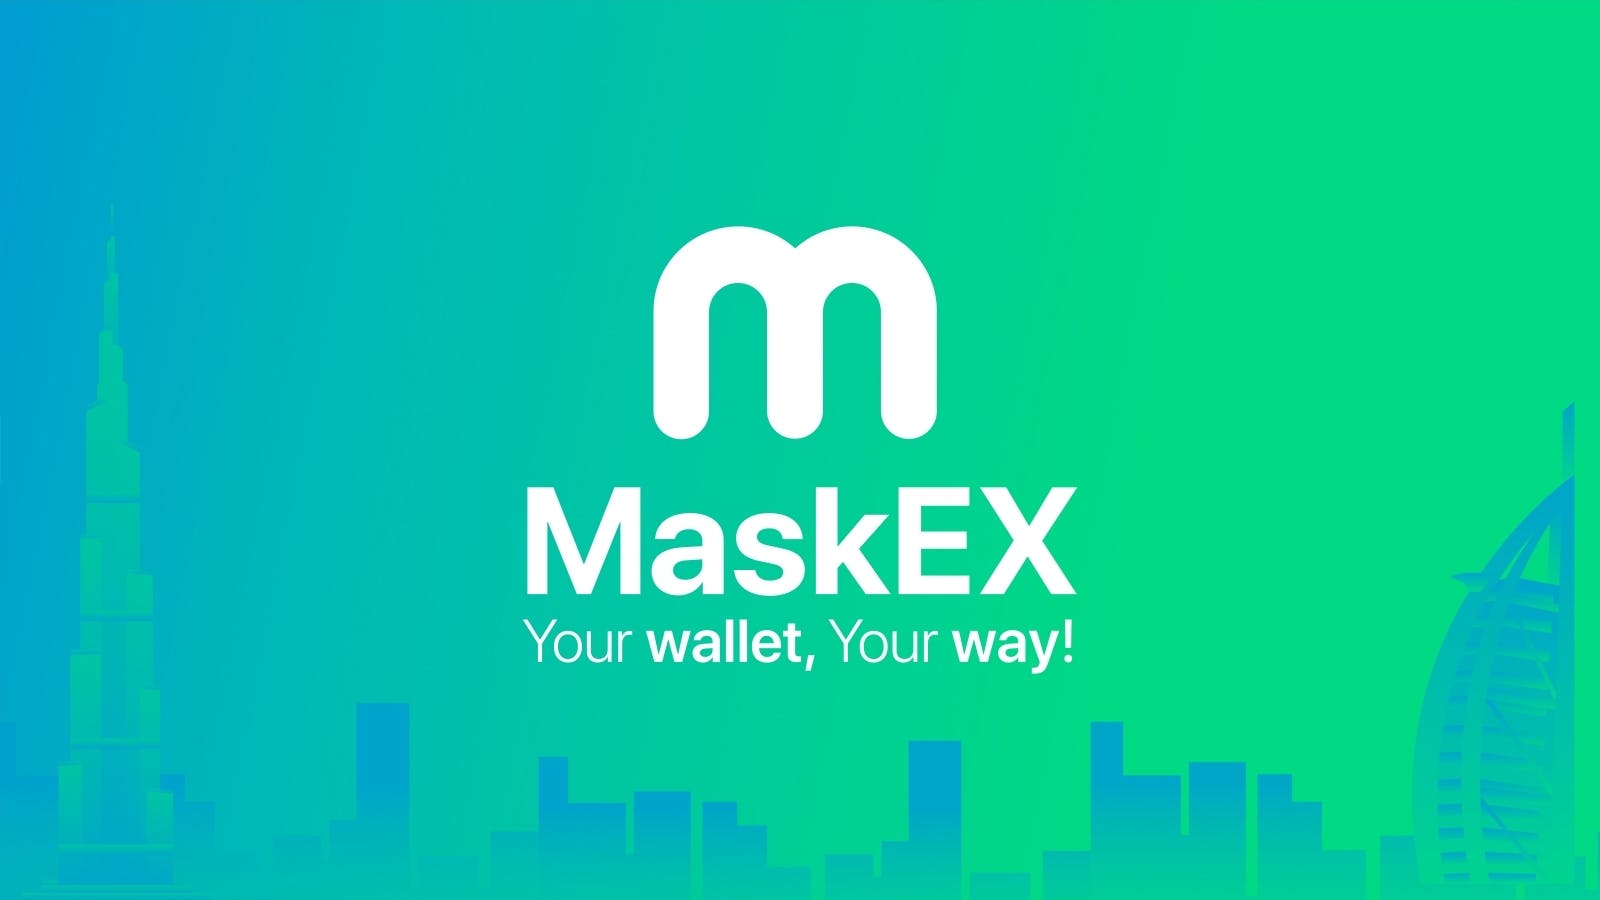 Dubai’s VARA Gives Highly Coveted Initial Approval to MaskEX, Gives Green Light To Start Making Provisions For Launch in the UAE